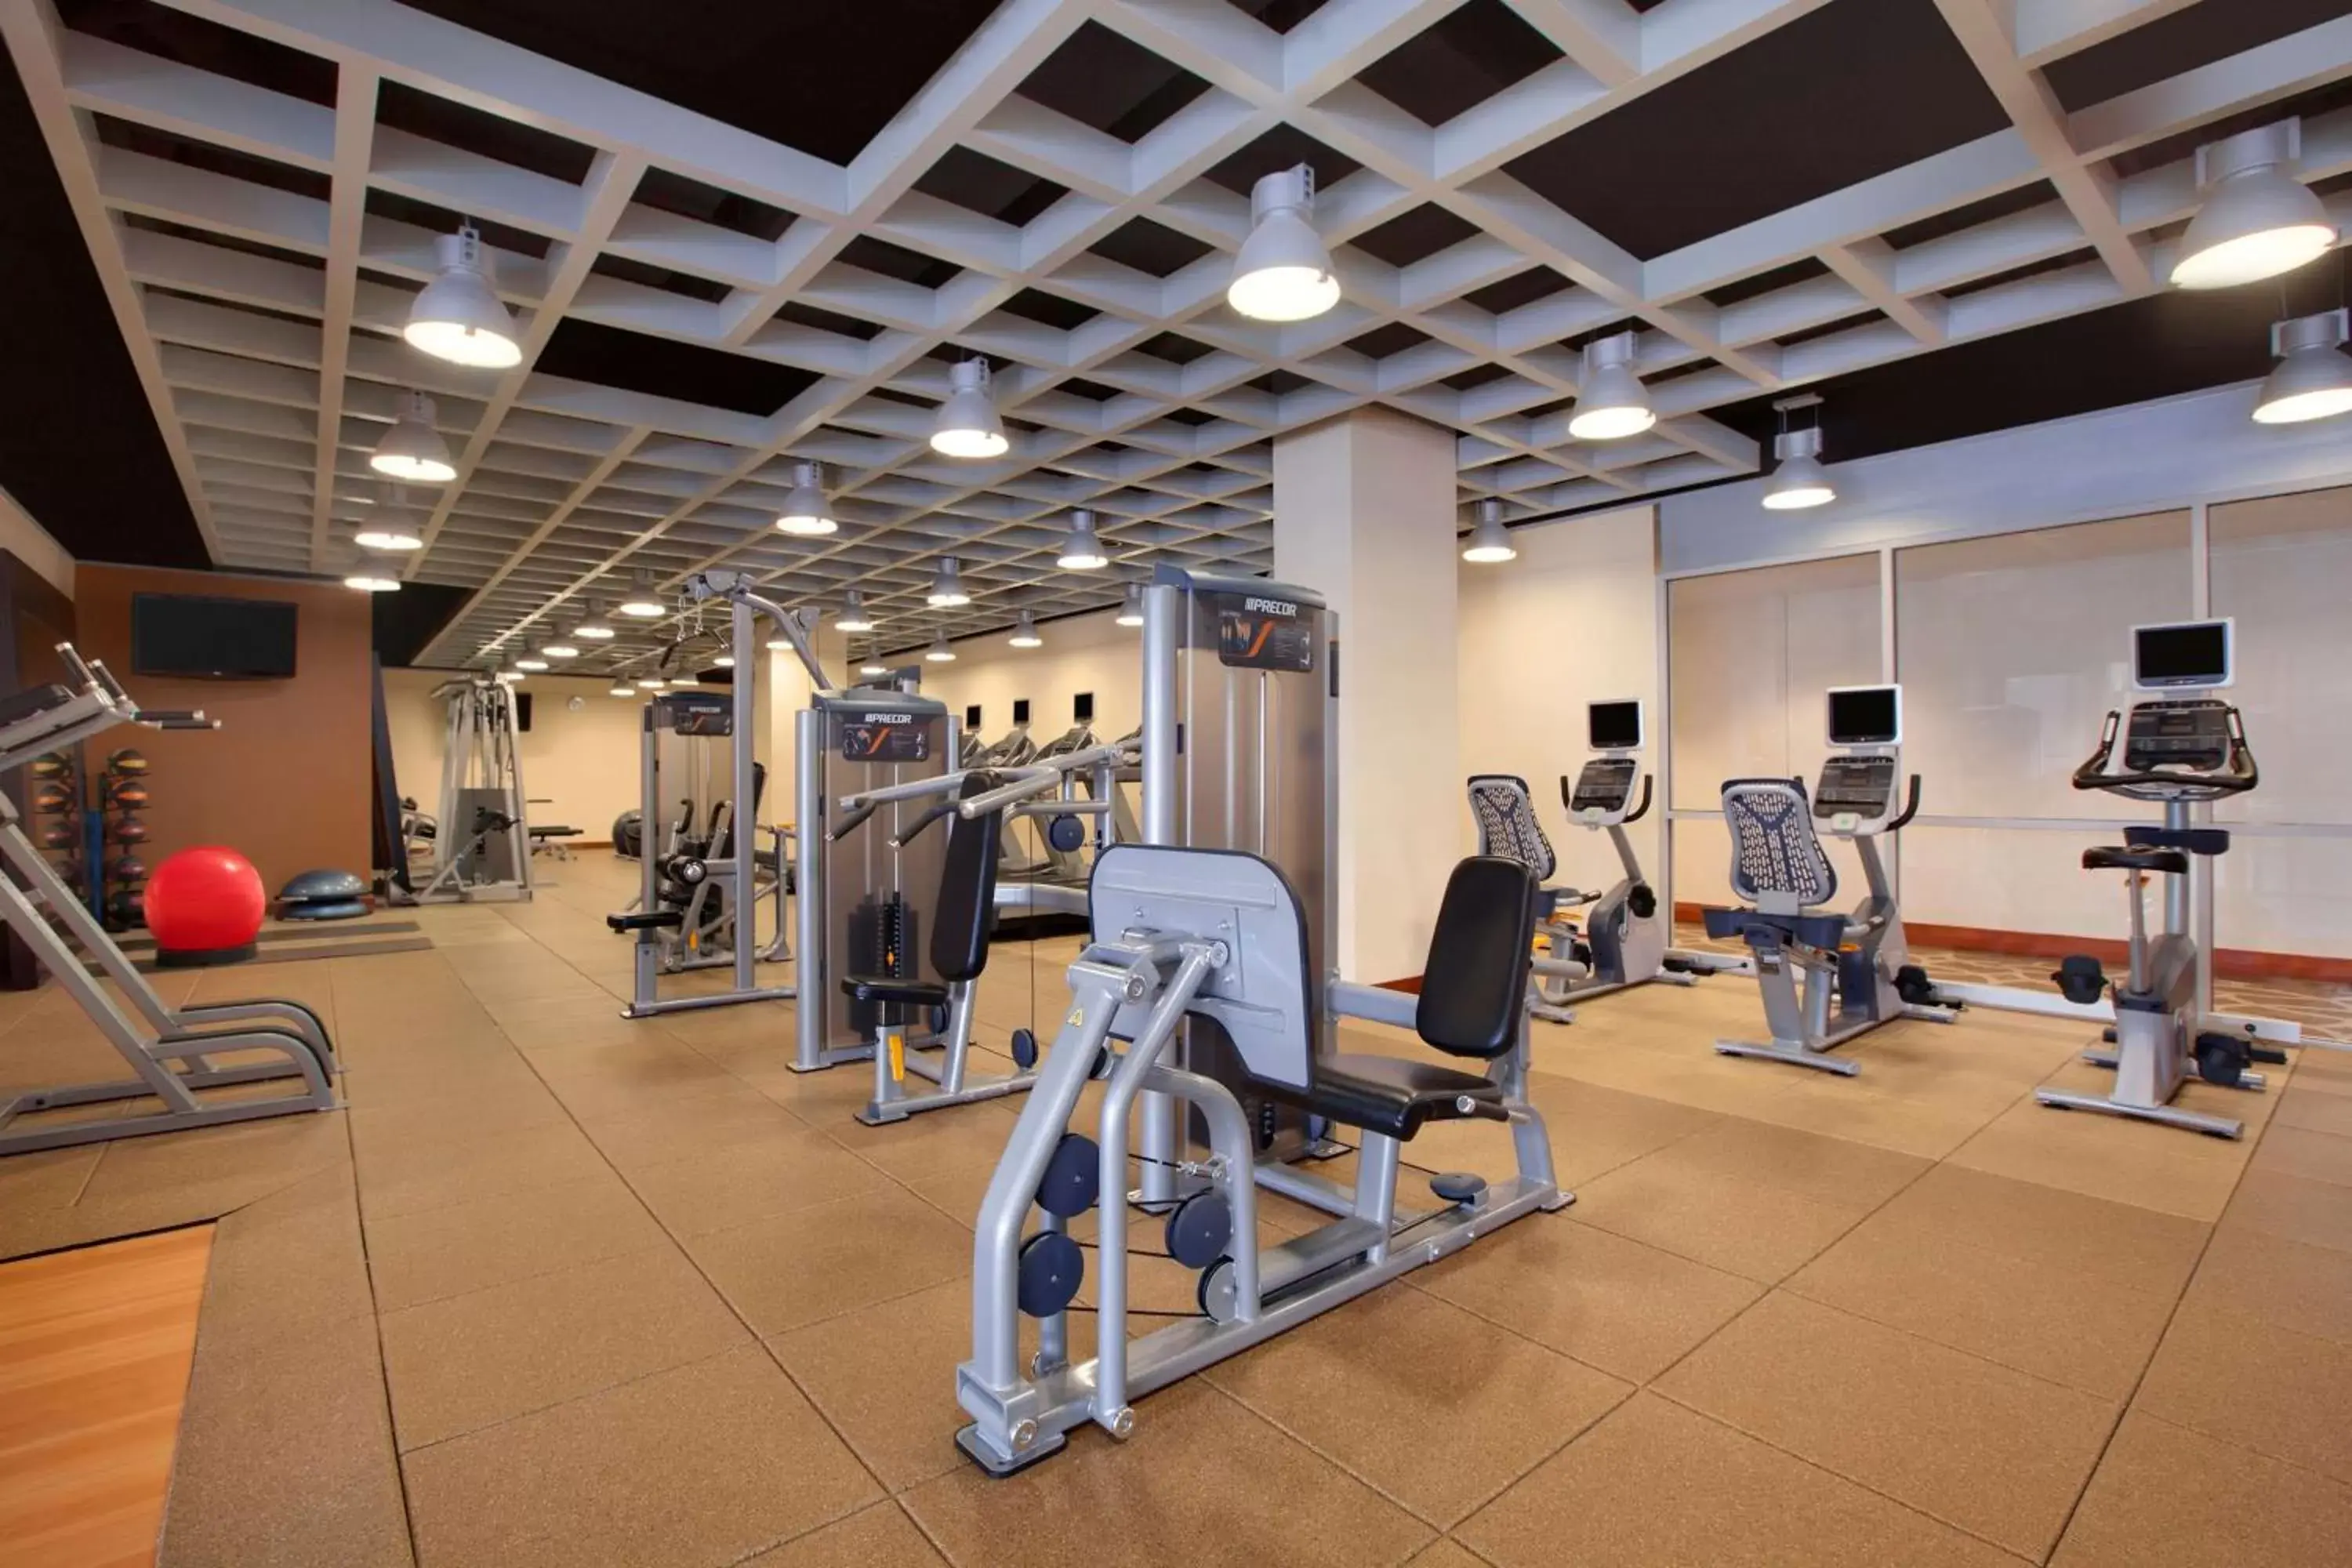 Fitness centre/facilities, Fitness Center/Facilities in Hilton Baltimore BWI Airport